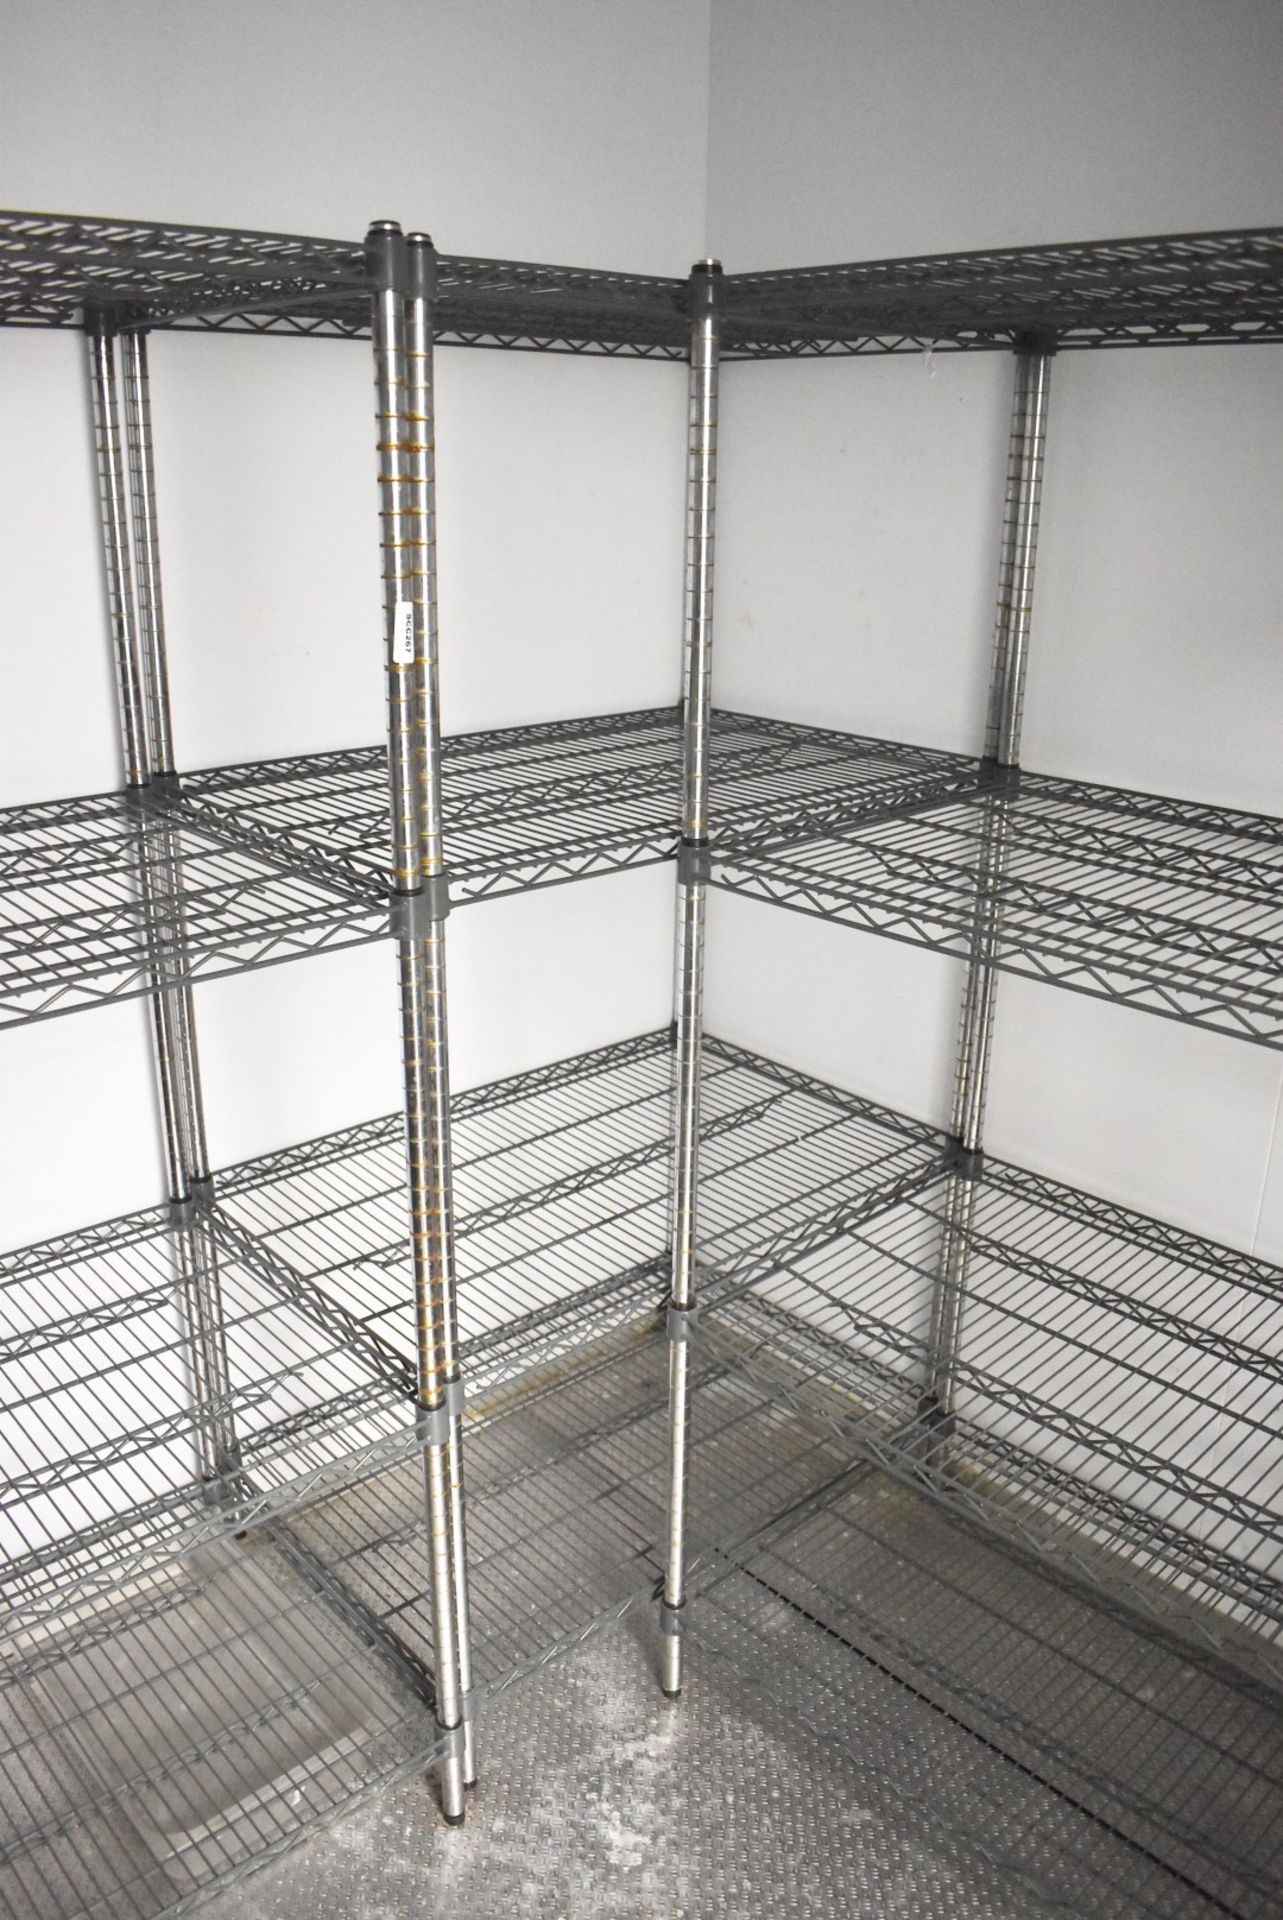 5 x Assorted Cold Room Wire Storage Shelf Units With Coated Shelves - H168 x W90-124 x D60 cms - Image 5 of 9